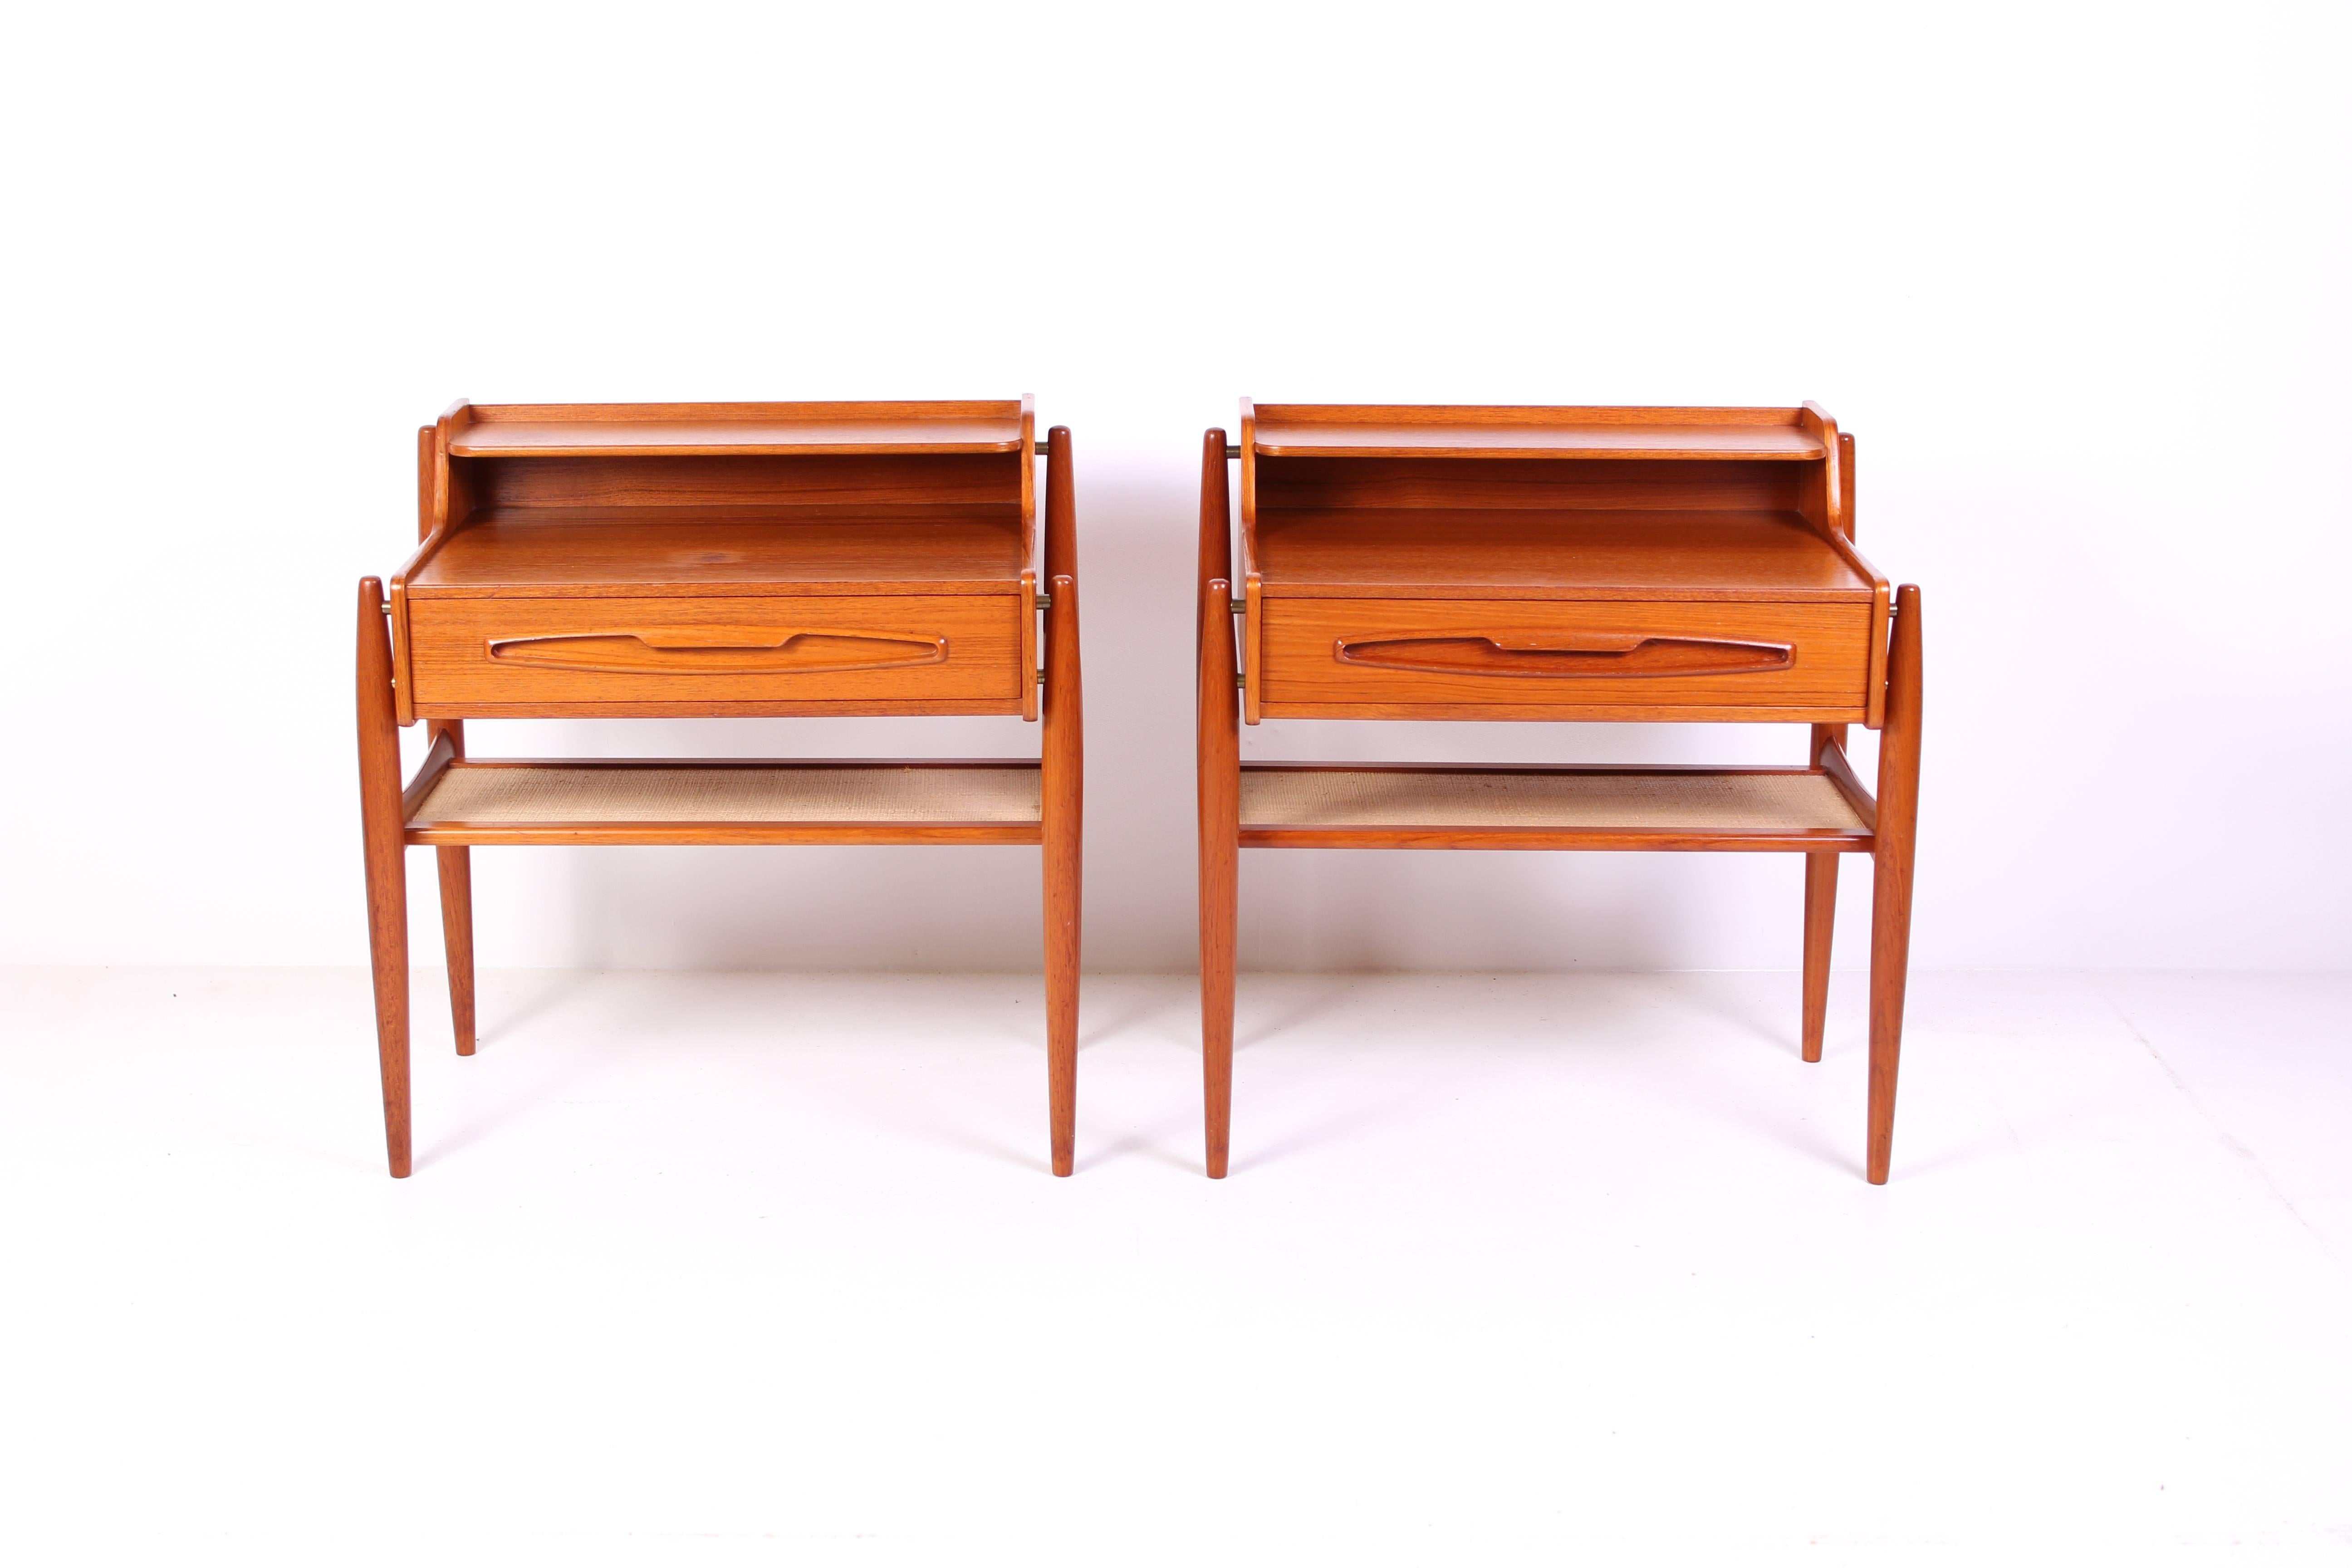 A pair of midcentury Danish nightstands made out of teak with brass details and rattan shelf. The nightstands are likely designed by Arne Vodder. 

Very good vintage condition but there are two darker spots on one of the night stands (see